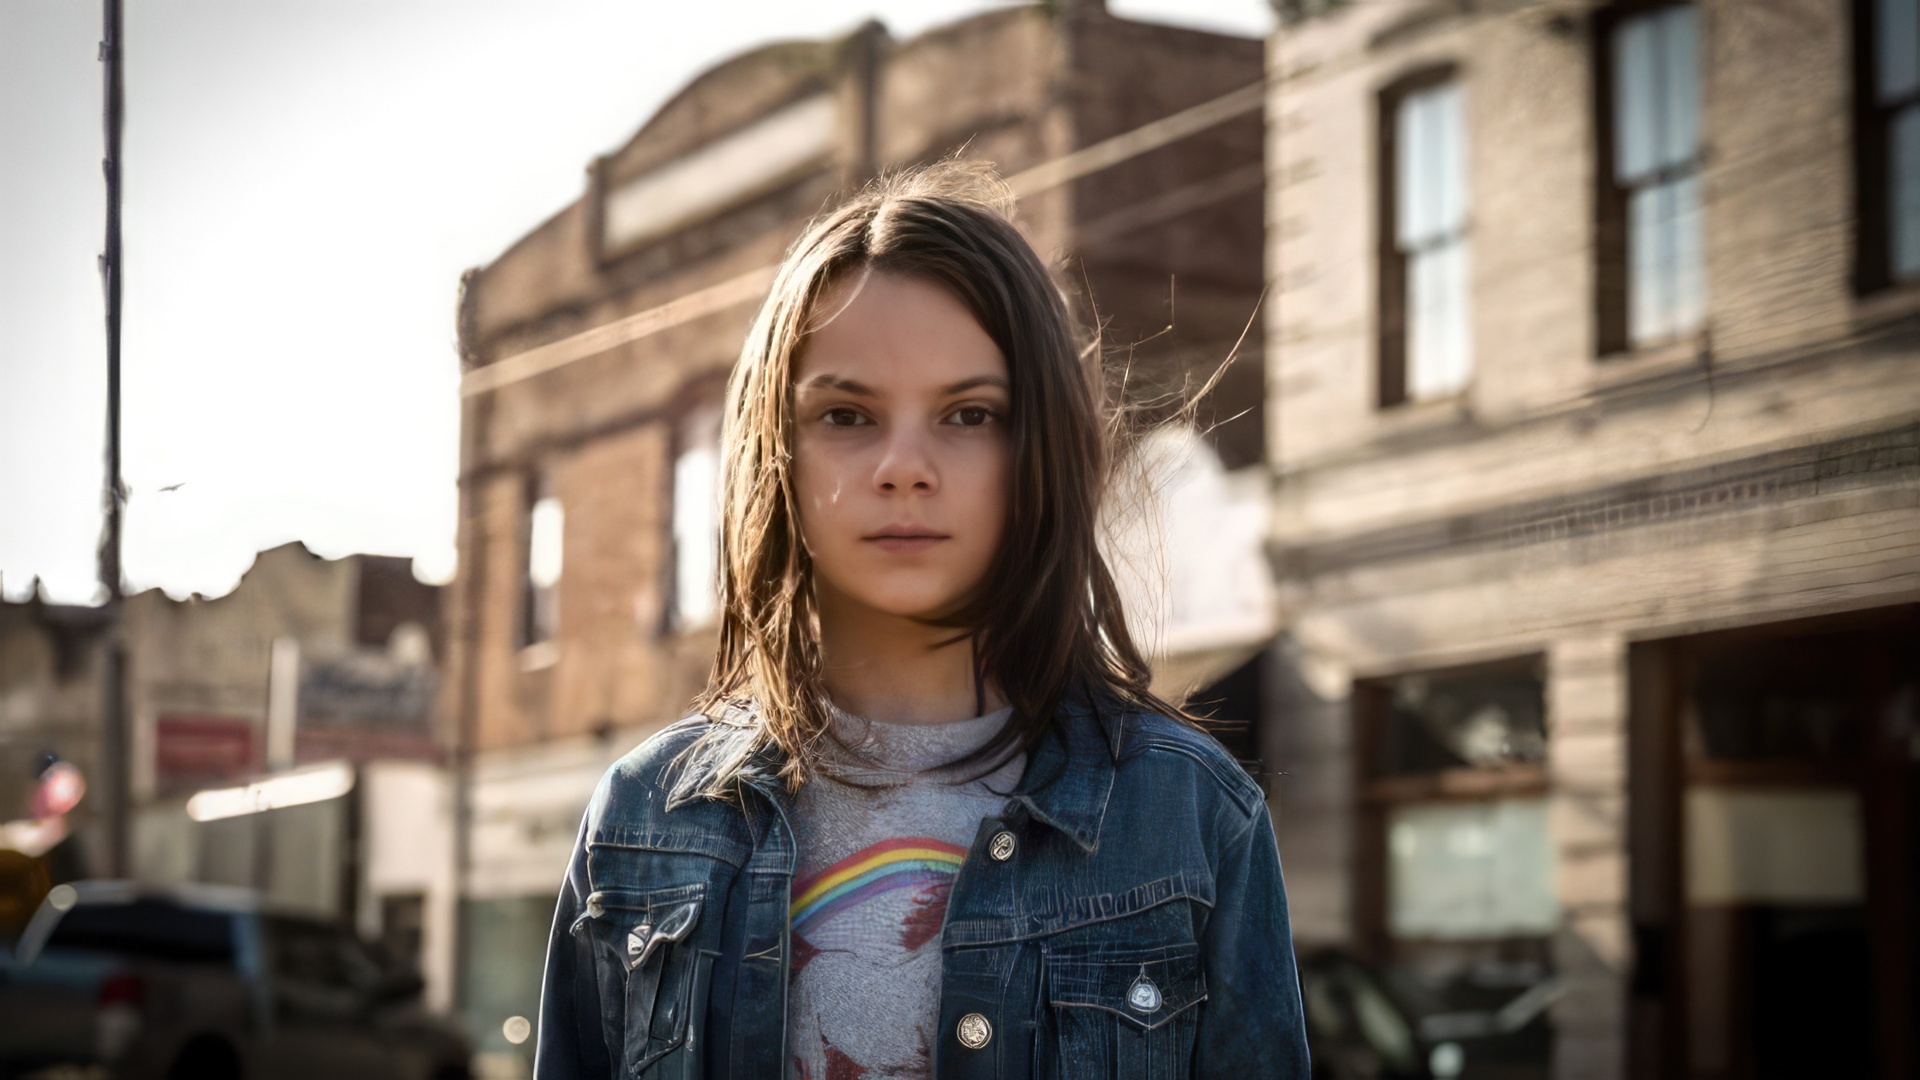 Dafne Keen is already very famous for her age